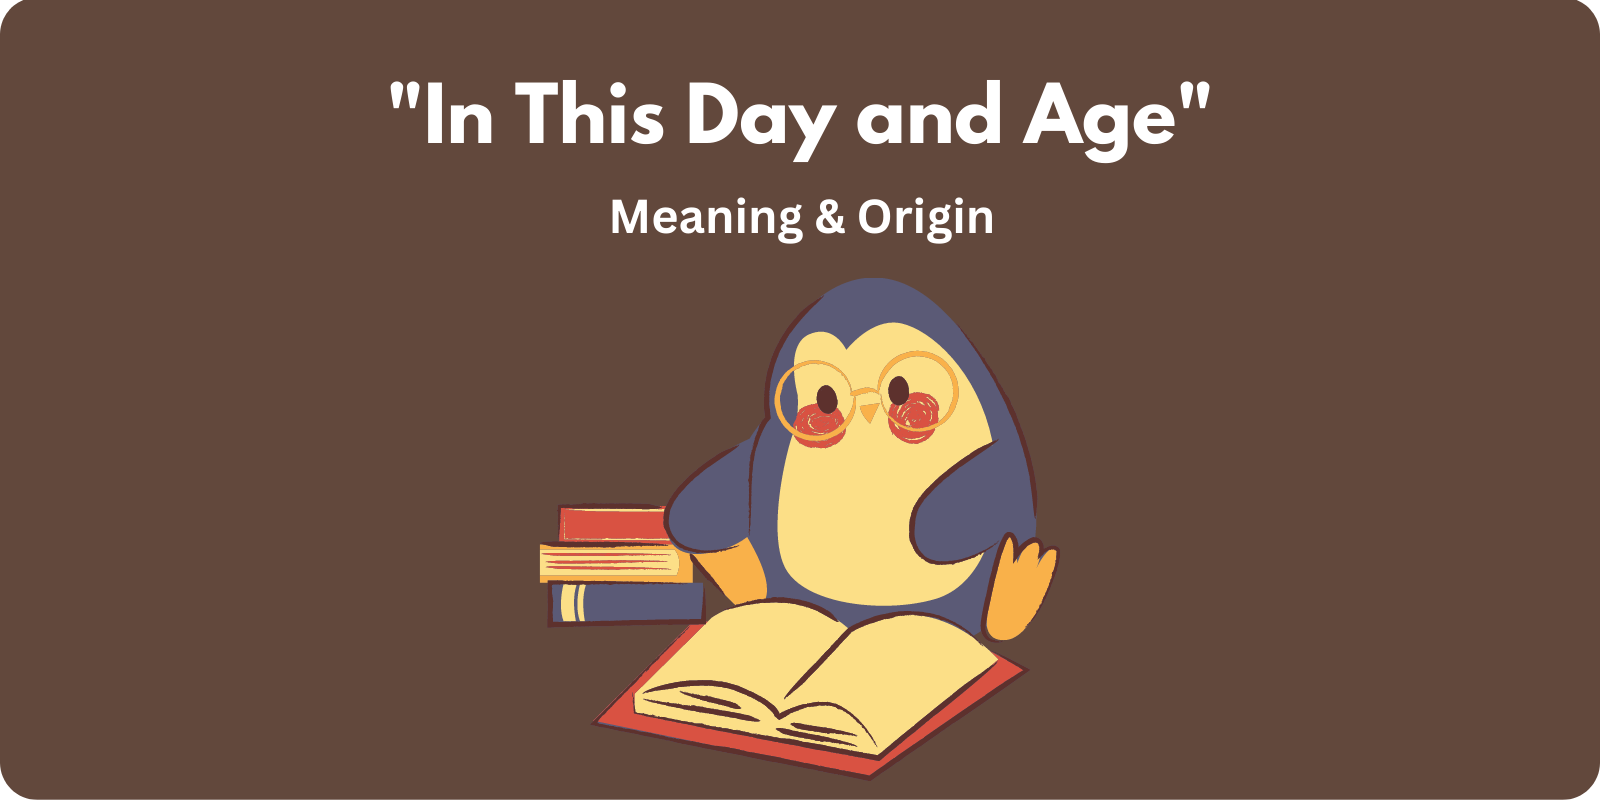 A penguin reading a book with the words "In This Day and Age" Meaning & Origin